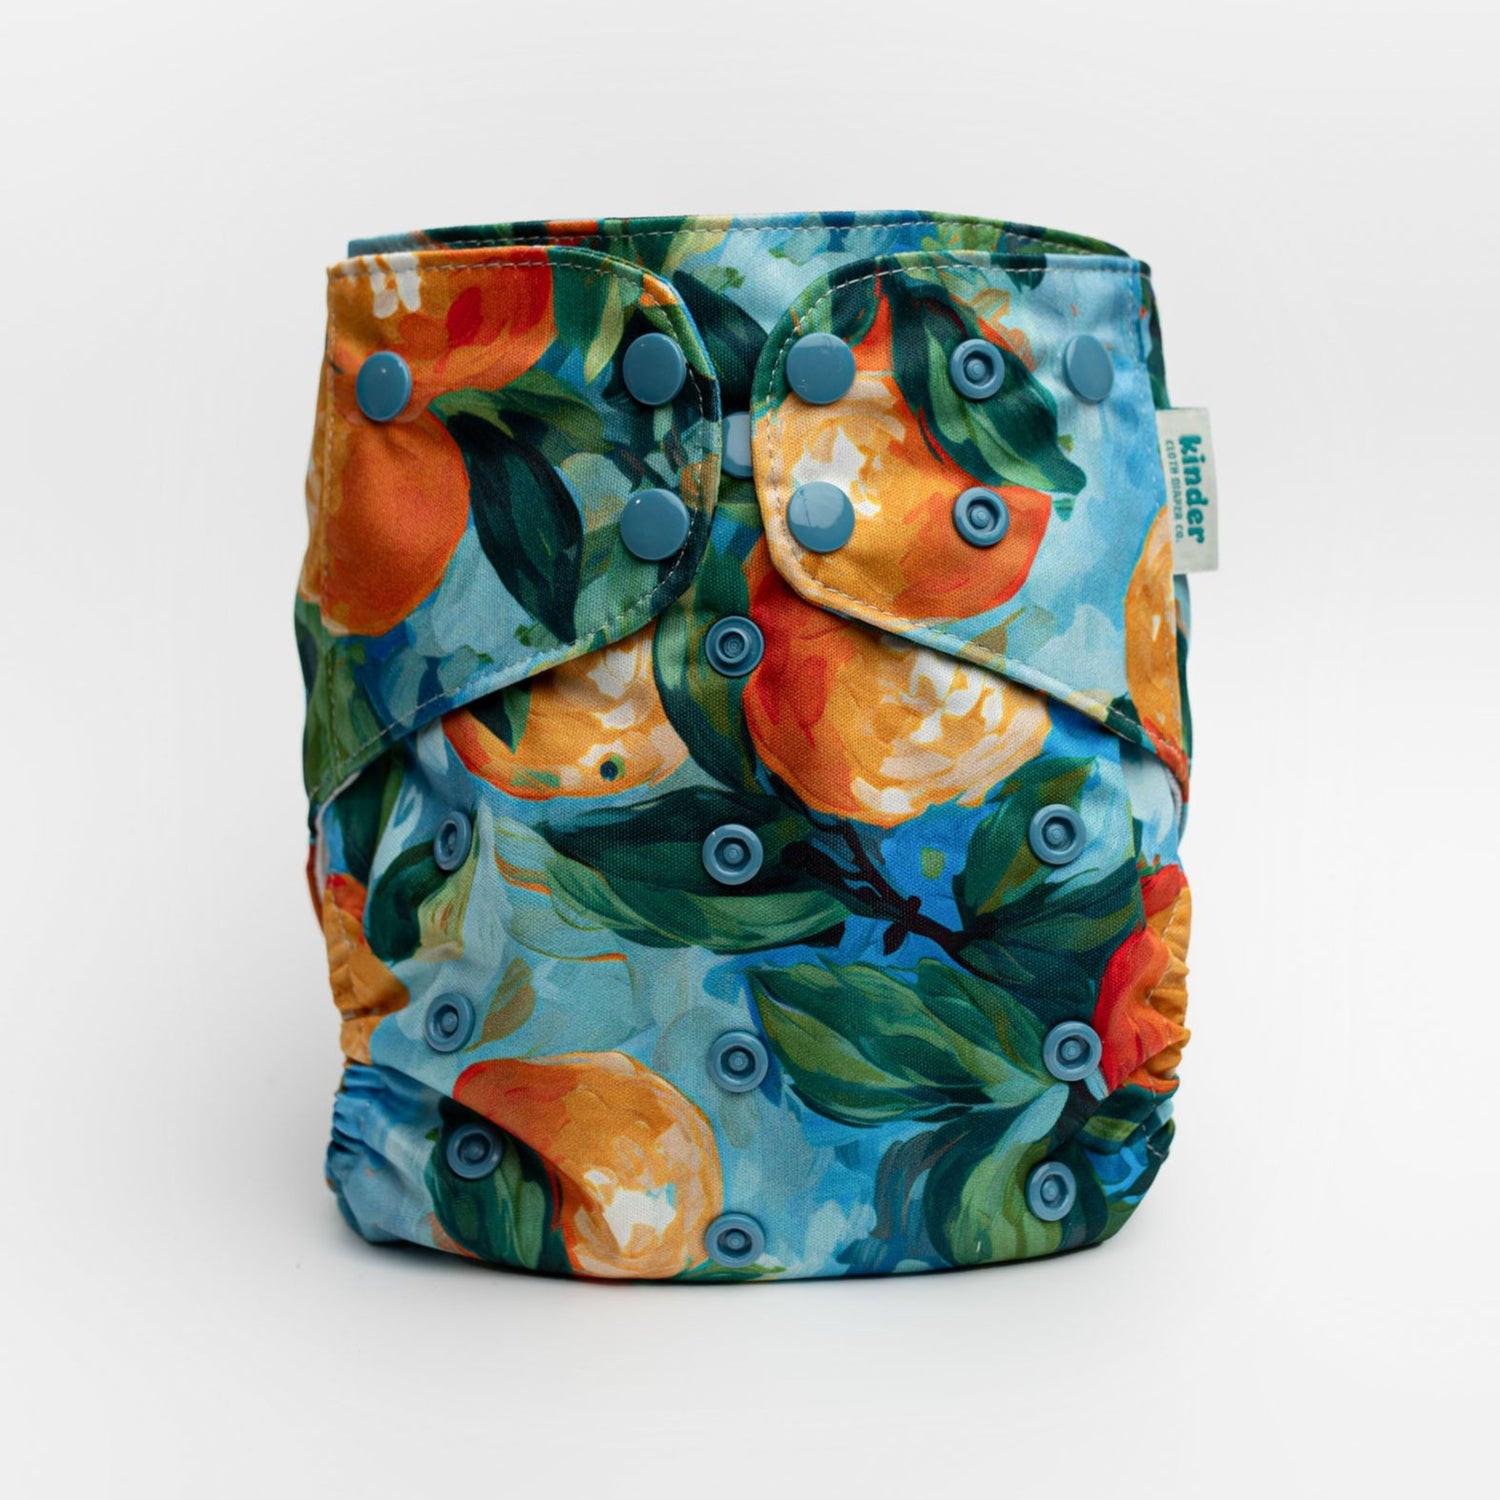 oranges painted art modern cloth diaper with awj jersey mesh reusable diapers